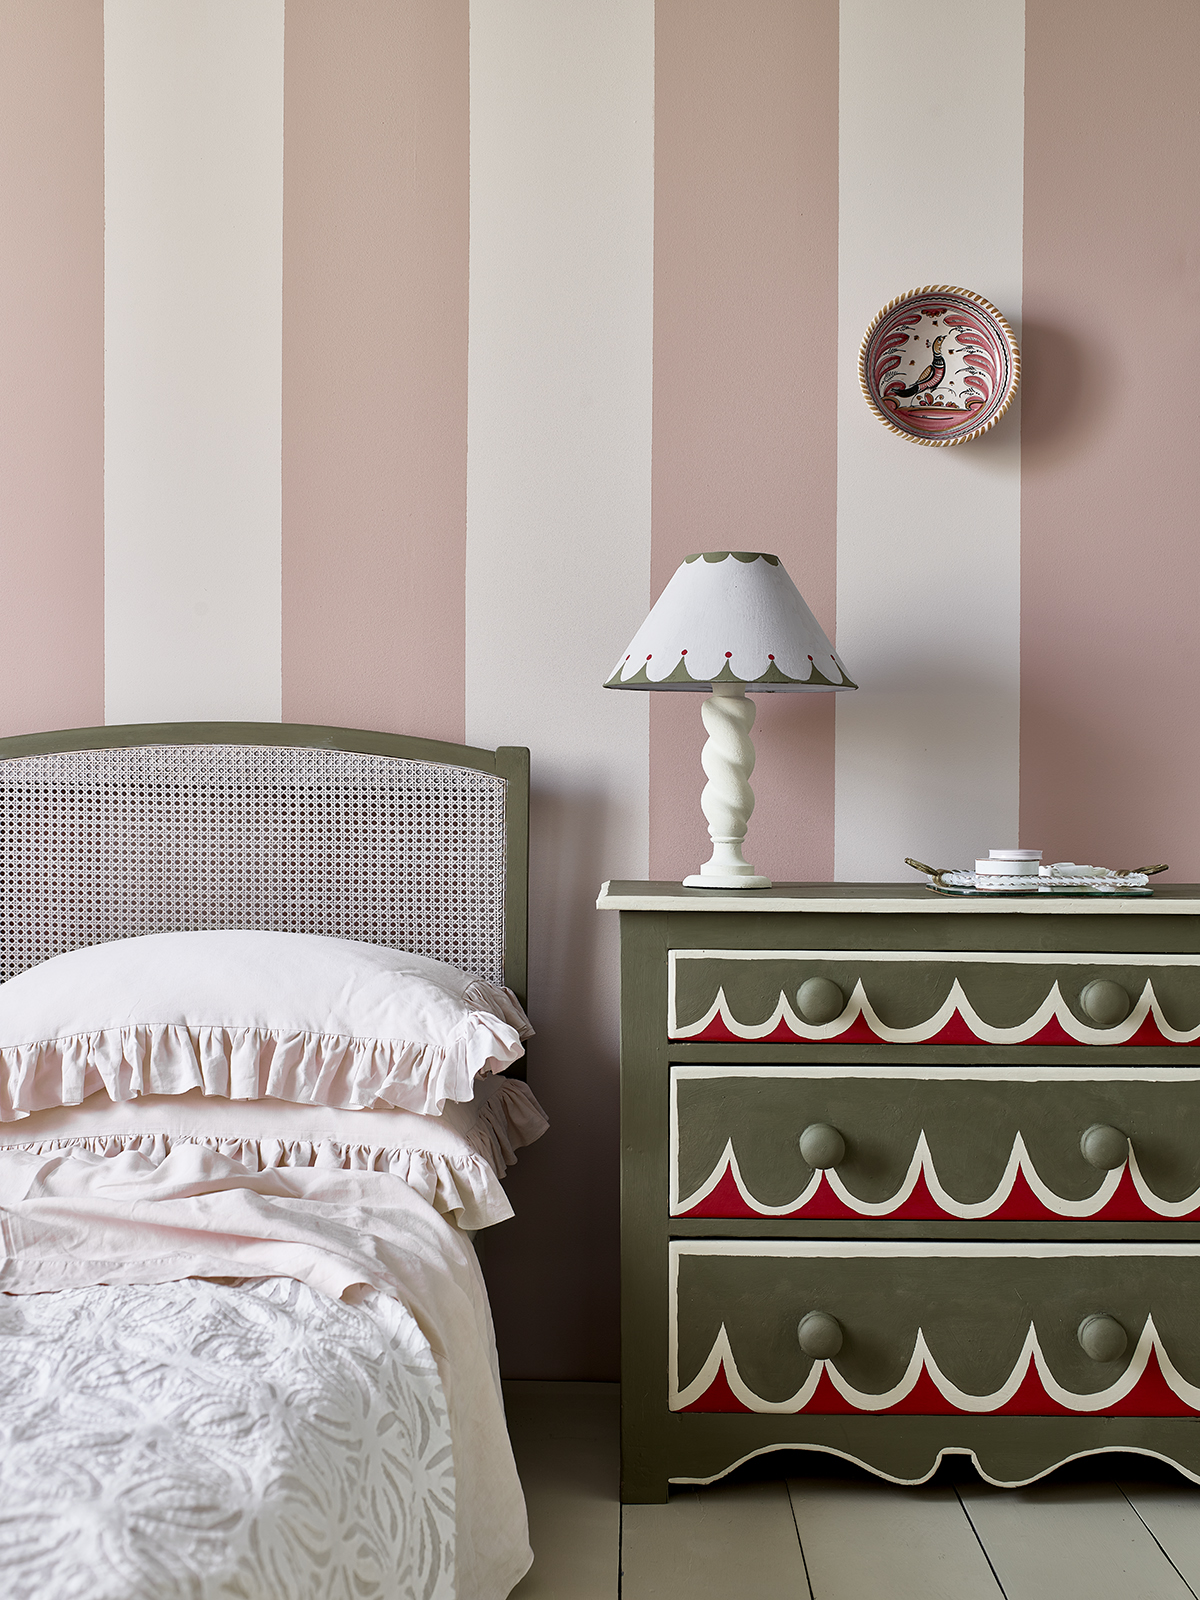 Annie Sloan wall painted used in striped effect in bedroom